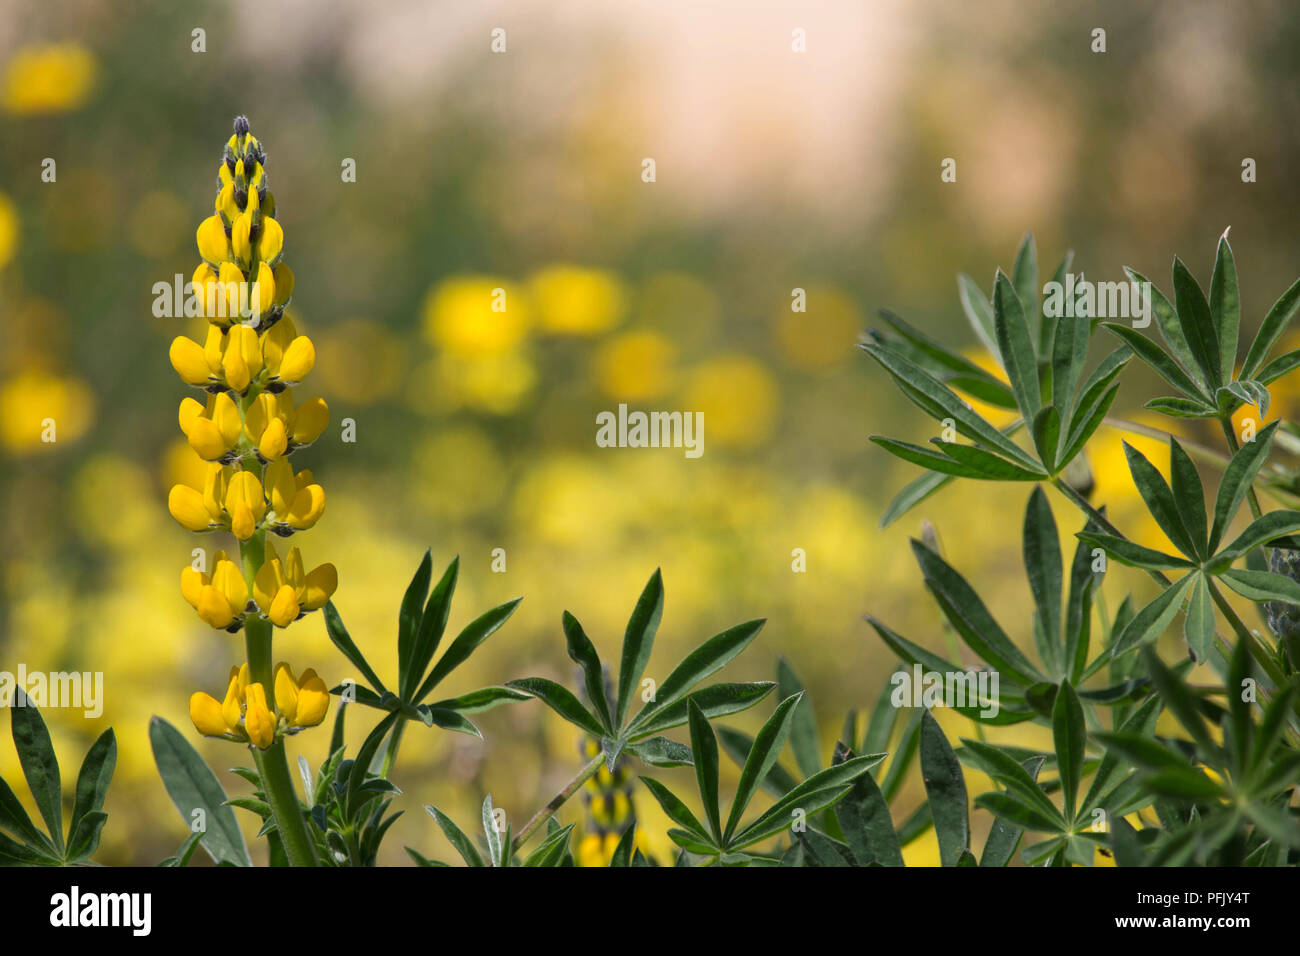 Beautiful lupine plant with blooming yellow flowers in natural background Stock Photo